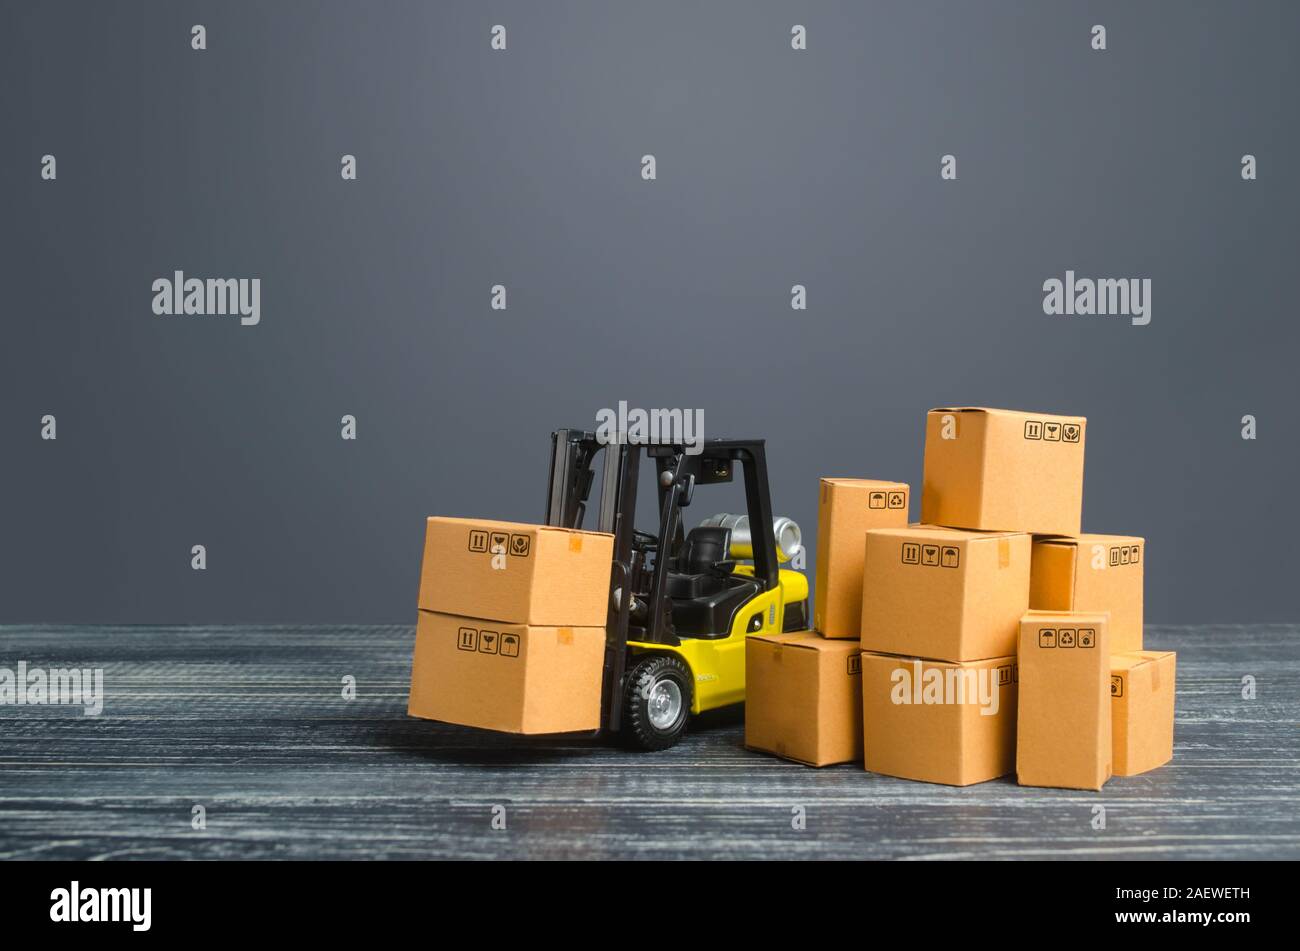 Yellow Forklift truck and cardboard boxes. Production, transport, cargo storage. Freight shipping. retail. Transportation logistics infrastructure, im Stock Photo